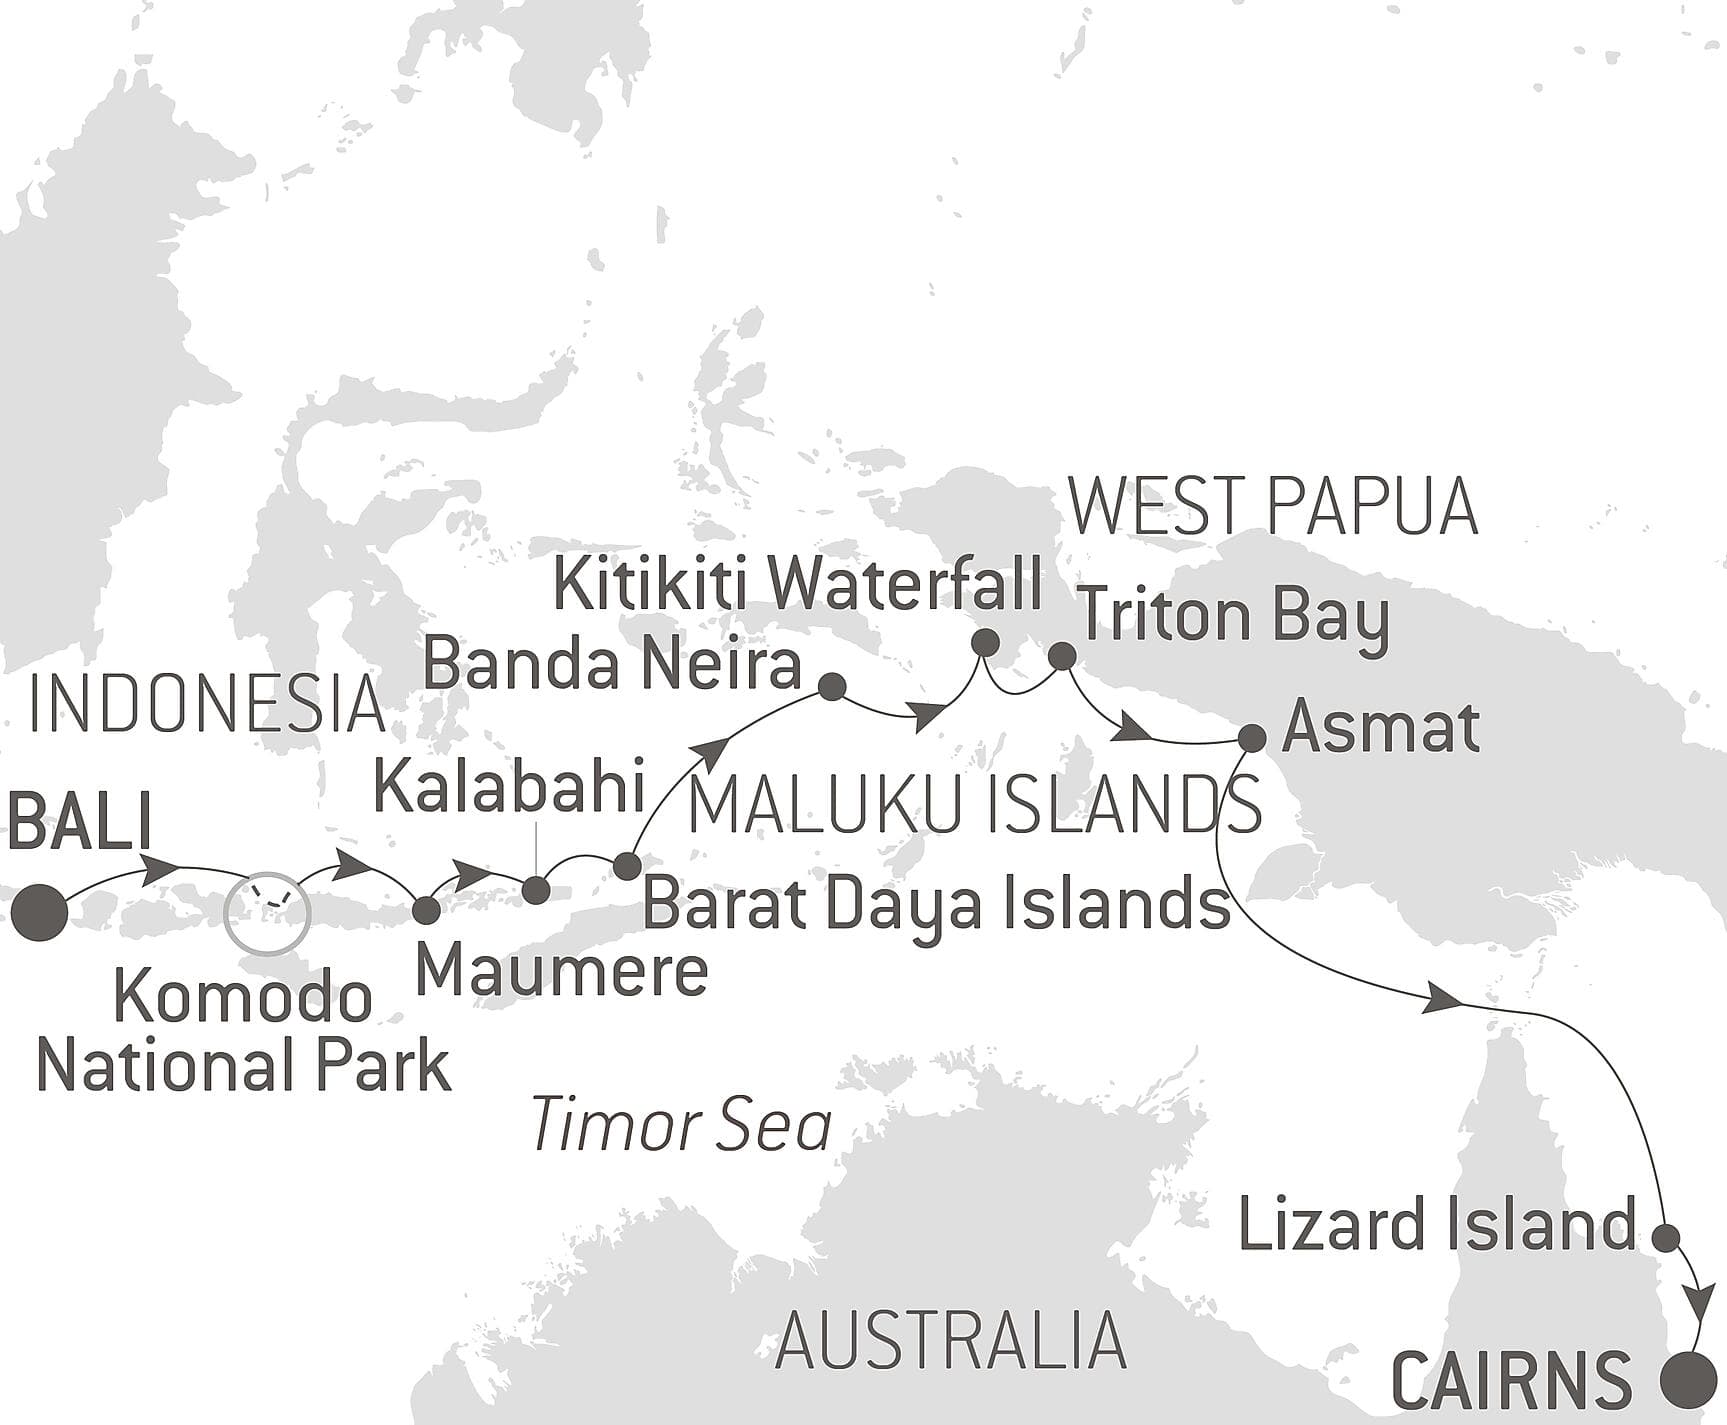 Tropical Odyssey between North East Australia and Indonesia